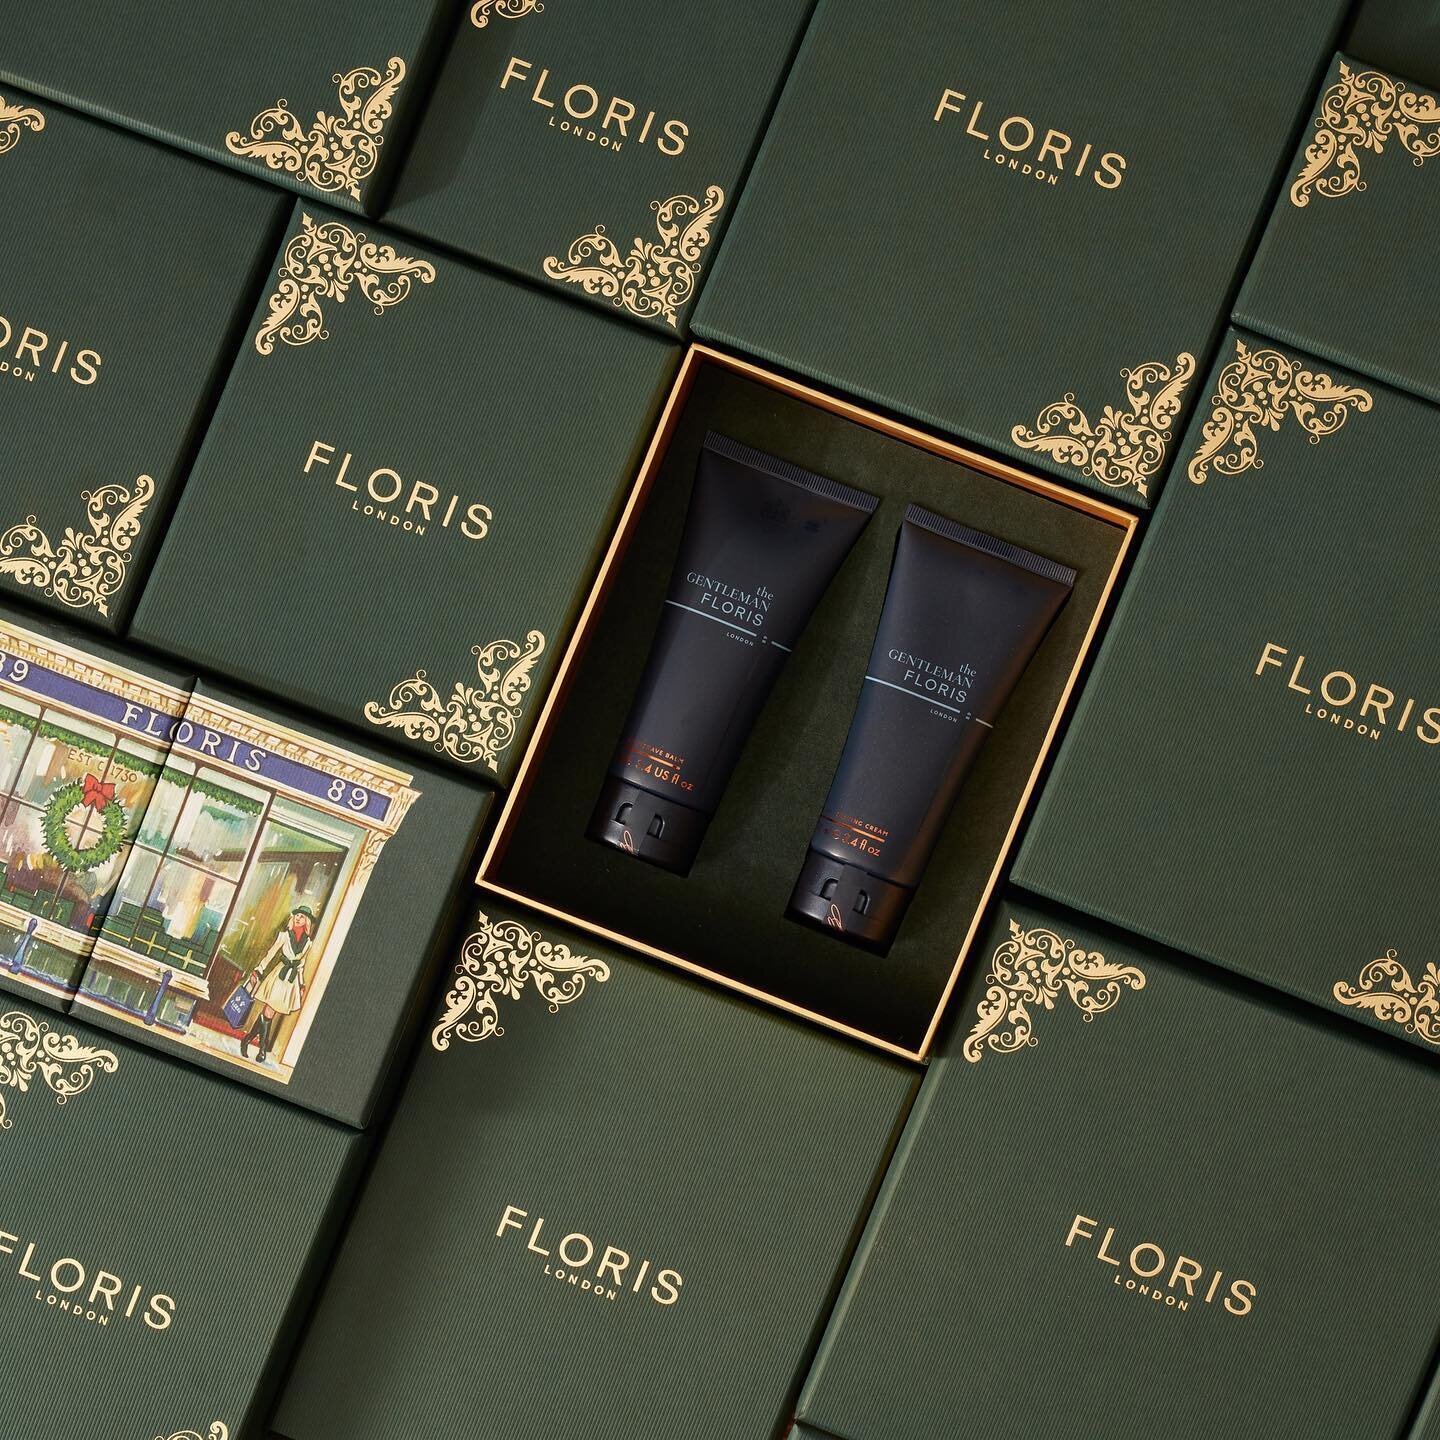 Heritage :: Check out our extensive range of @florislondon grooming products in store. Stuck for that perfect stocking filler then look no further, holder of 2 Royal warrants and a secret passage to Buckingham Palace it quintessentially British. 
Flo